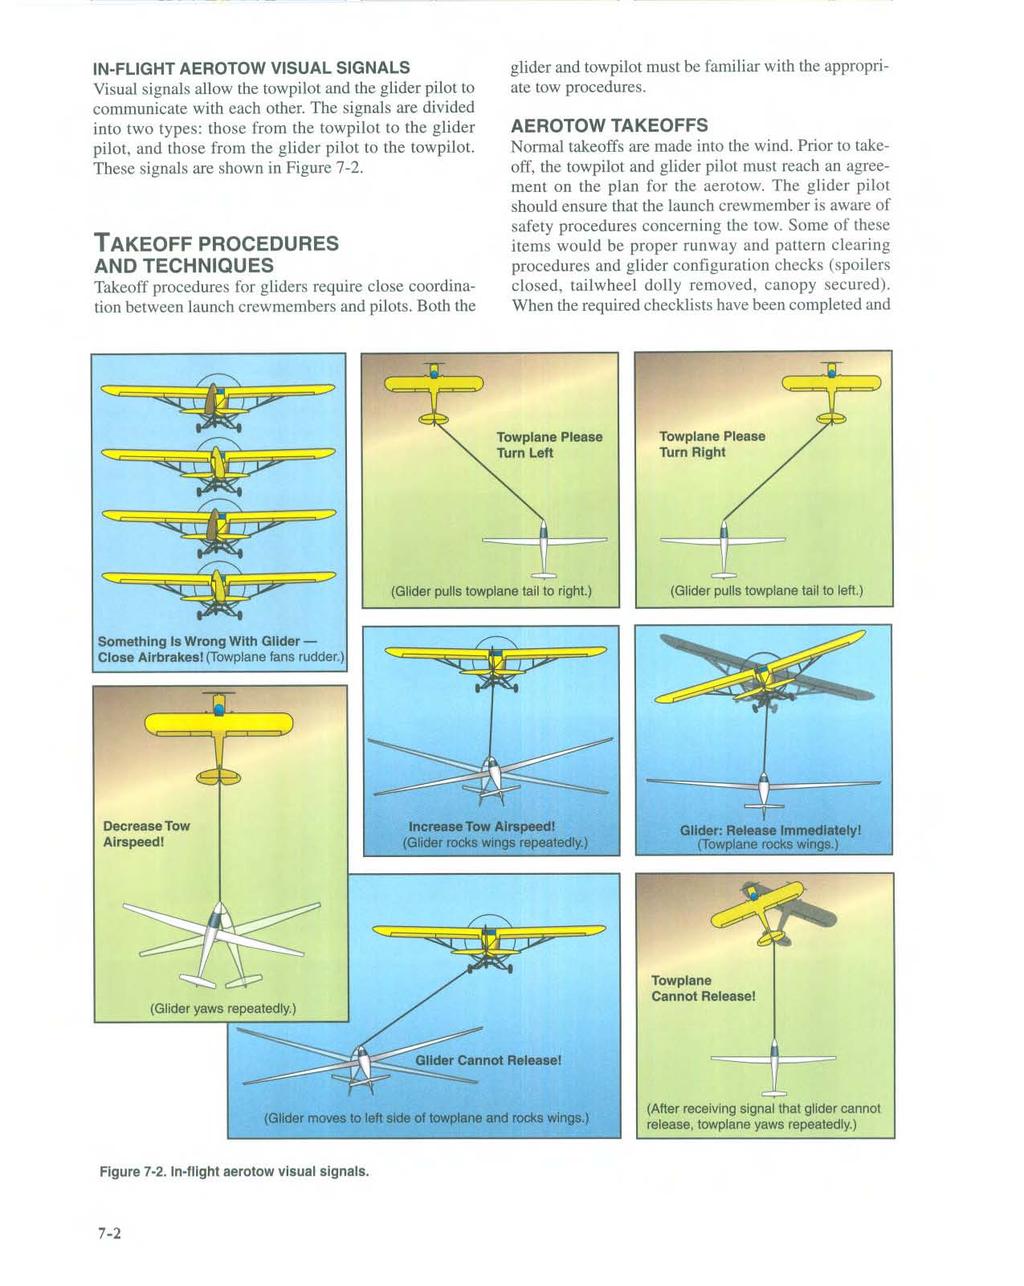 IN-FLIGHT AEROTOW VISUAL SIGNALS Visual signals allow the towpilot and the glider pilot to communicate with each other.